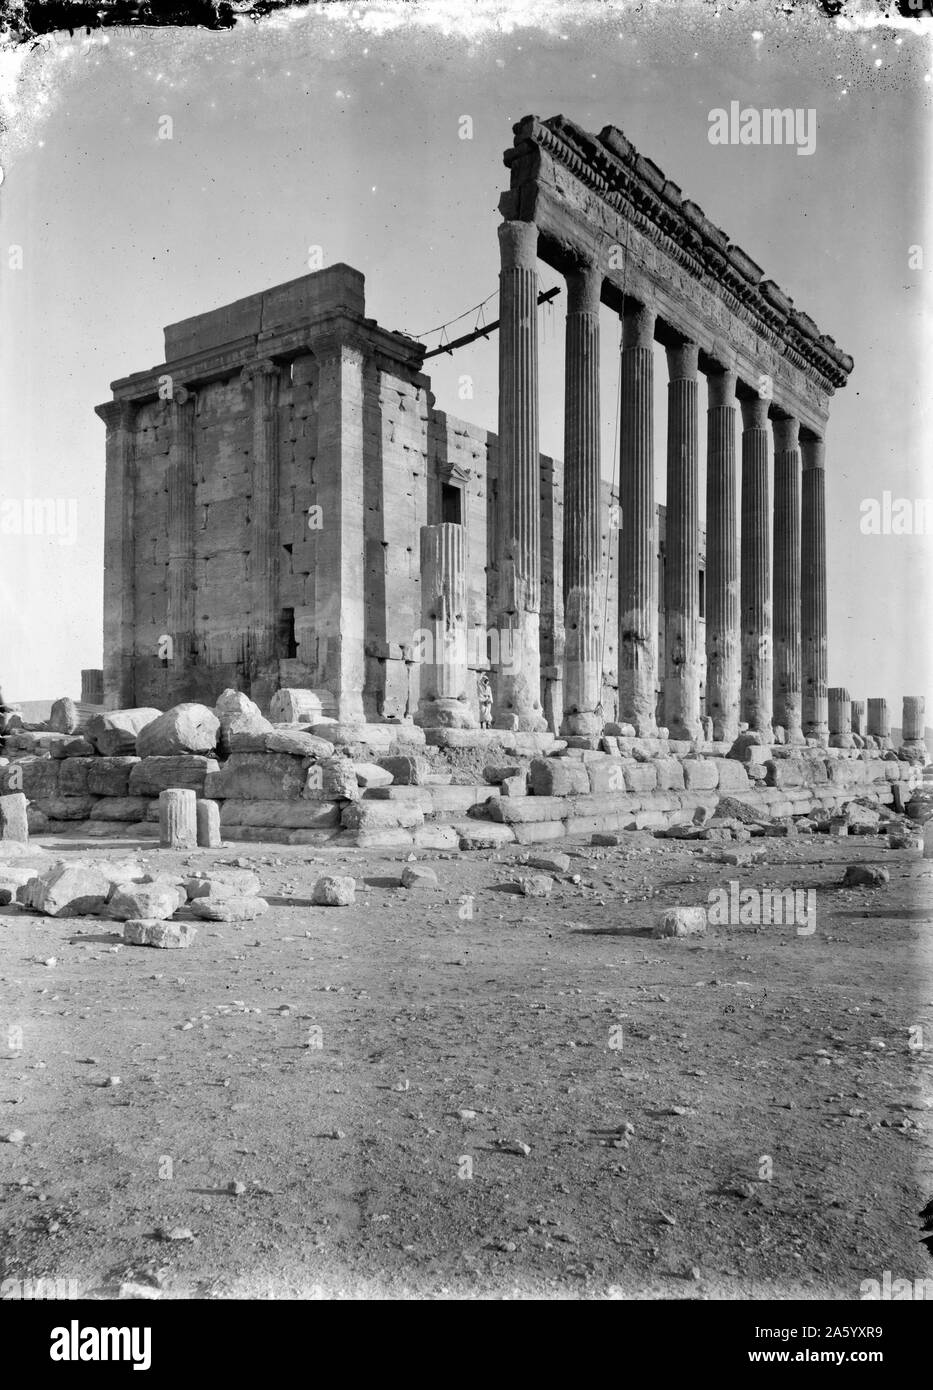 Palmyra, Syria 1900. Palmyra is an ancient city in present Homs Governorate, Syria. Temple built after its incorporation into the Roman Empire in the first century. Stock Photo